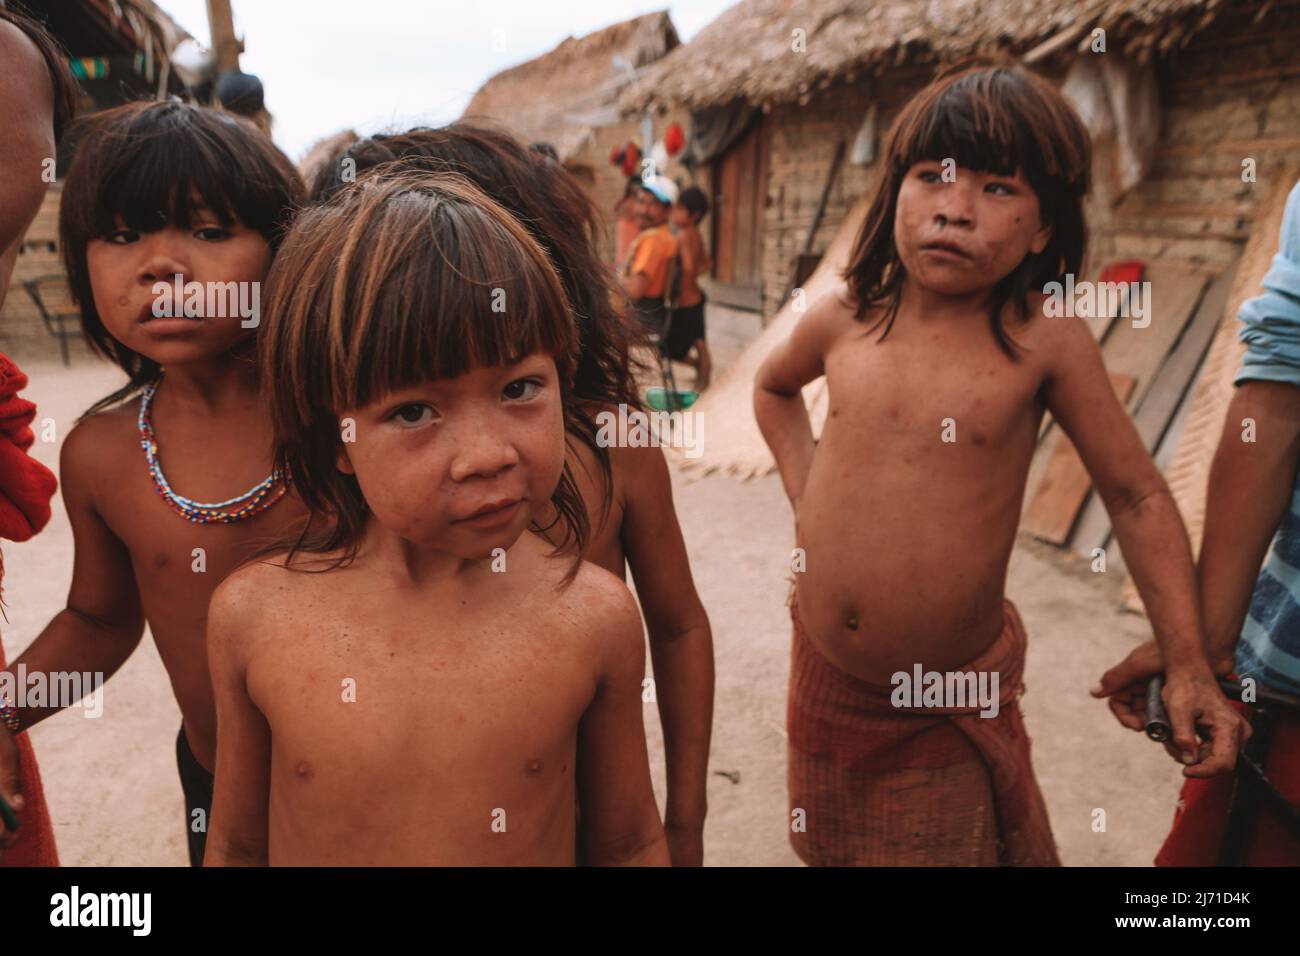 Group of indian children from an Amazon indigenous tribe in Brazil looking curiously at the camera. Baixo Amazonas, Pará, Brazil. 2010. Stock Photo